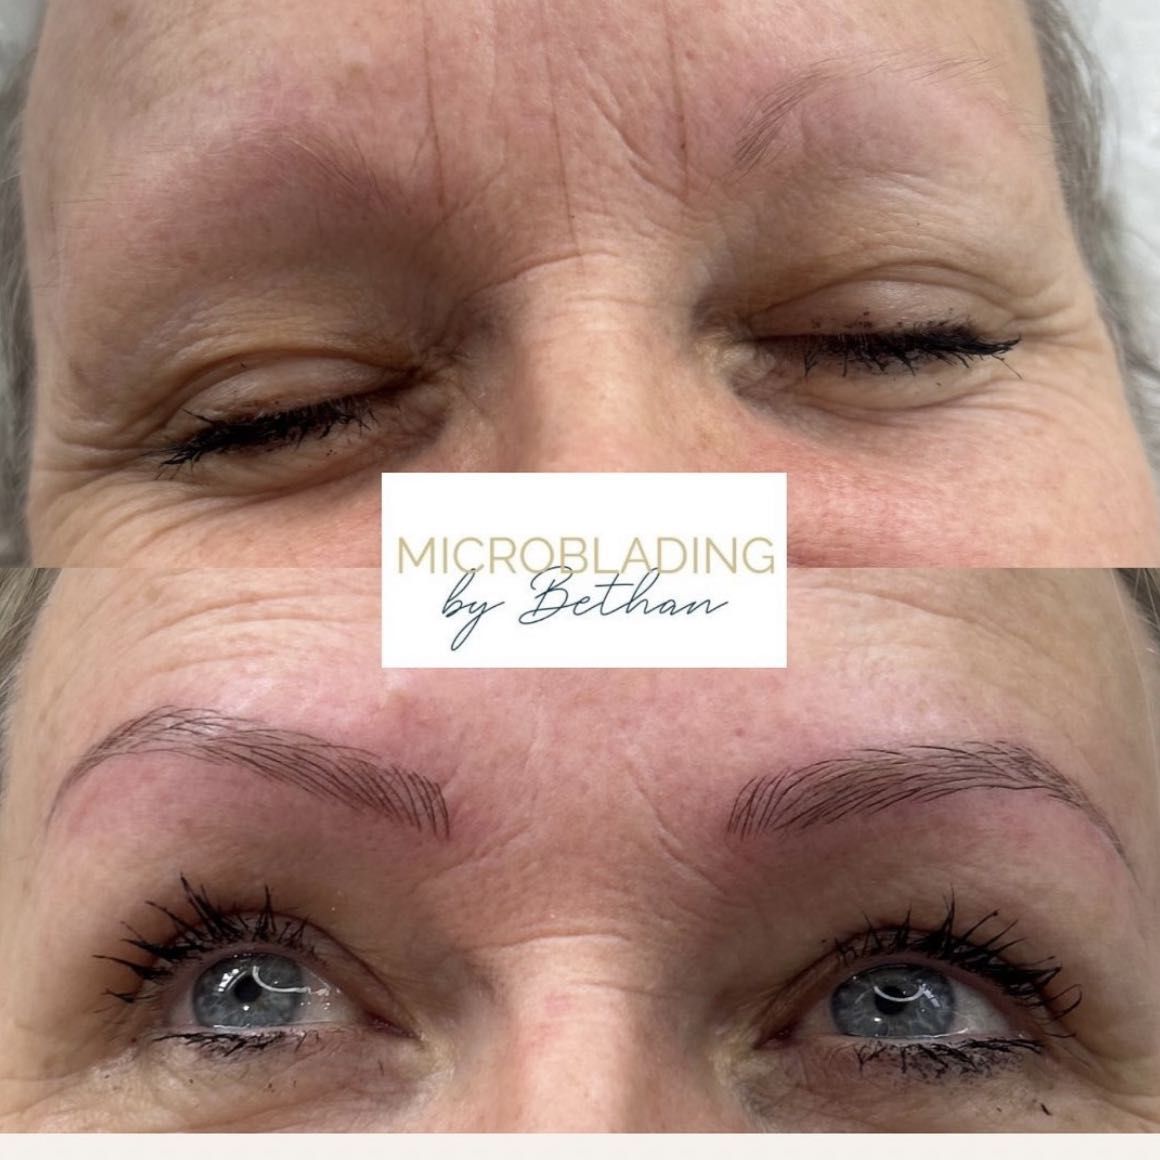 Microblading refresh not my Wk 2 sessions AM only portfolio